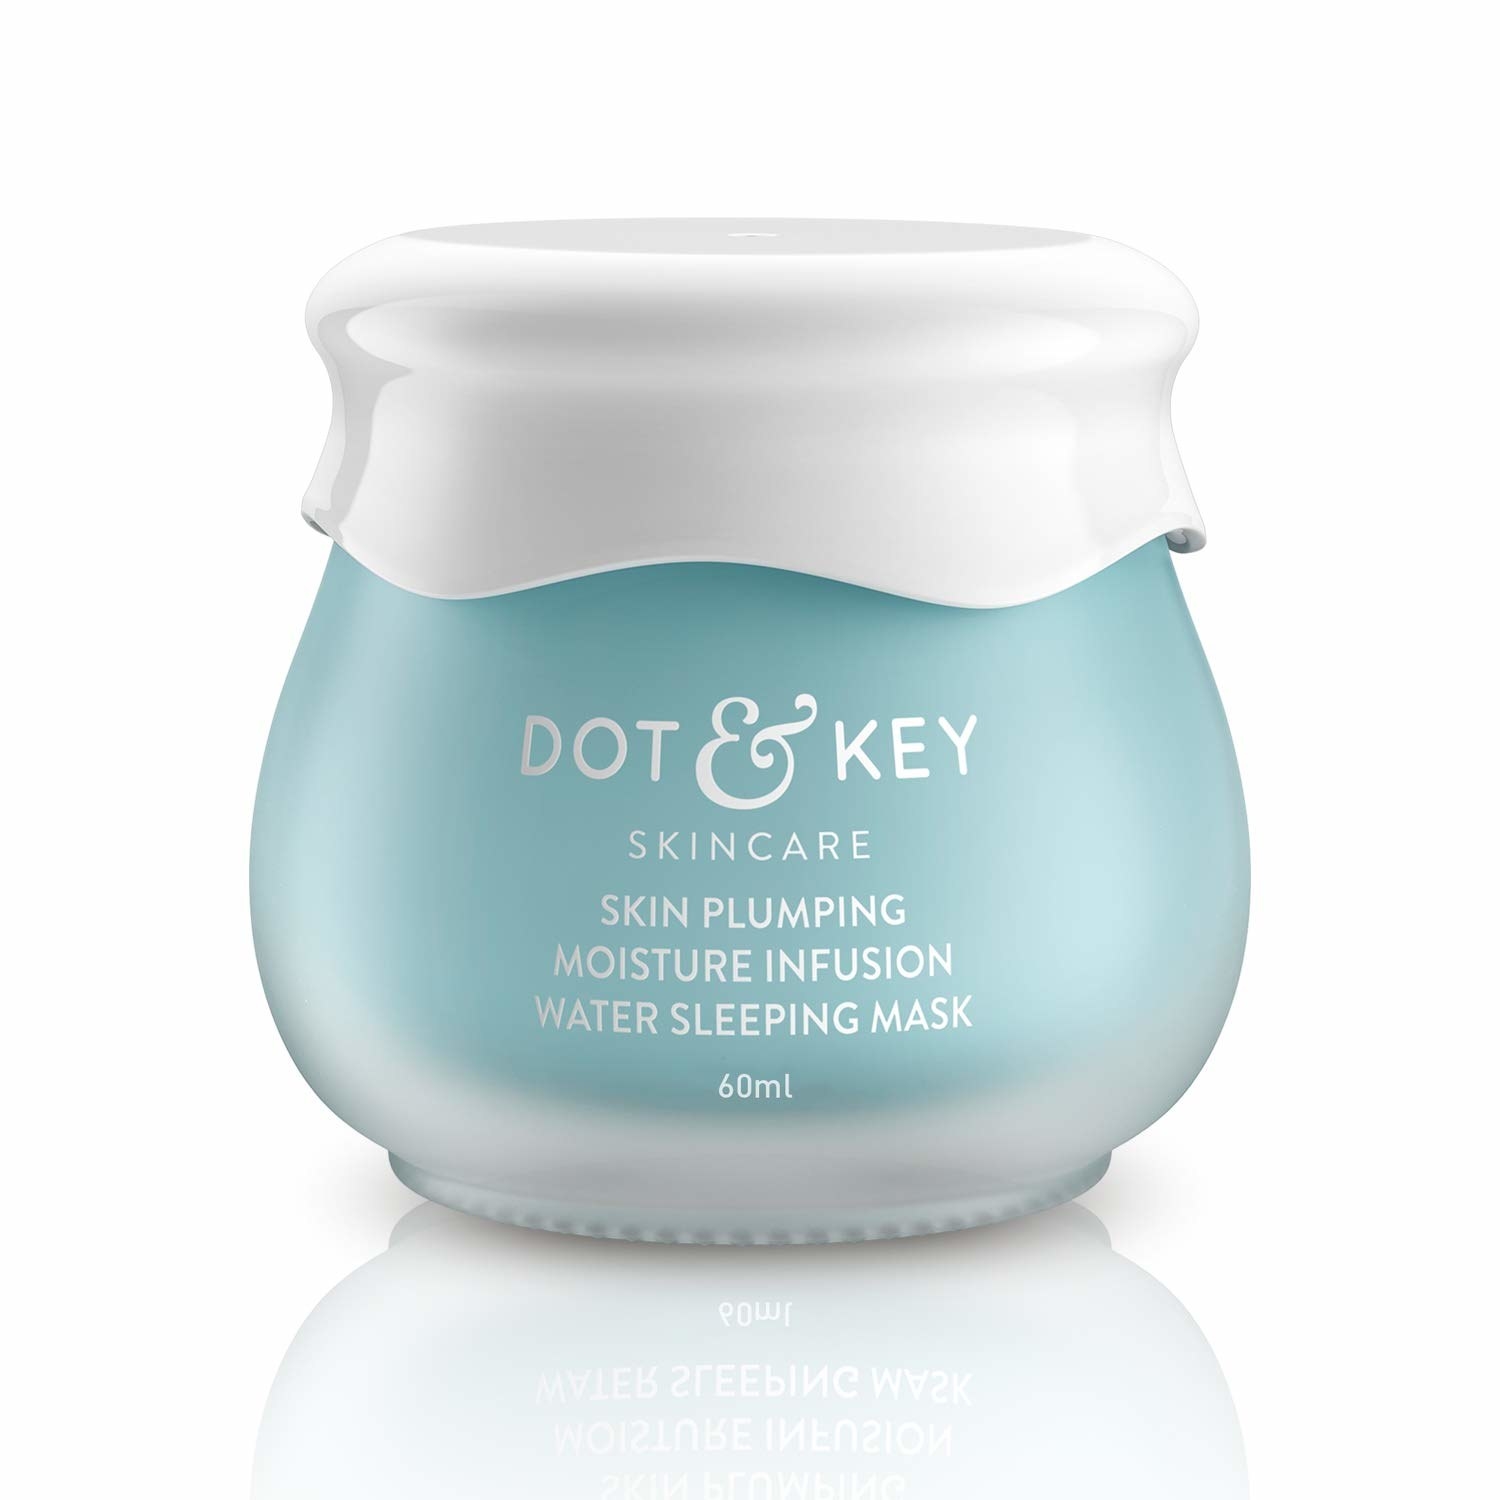 Light blue packaging of the face mask